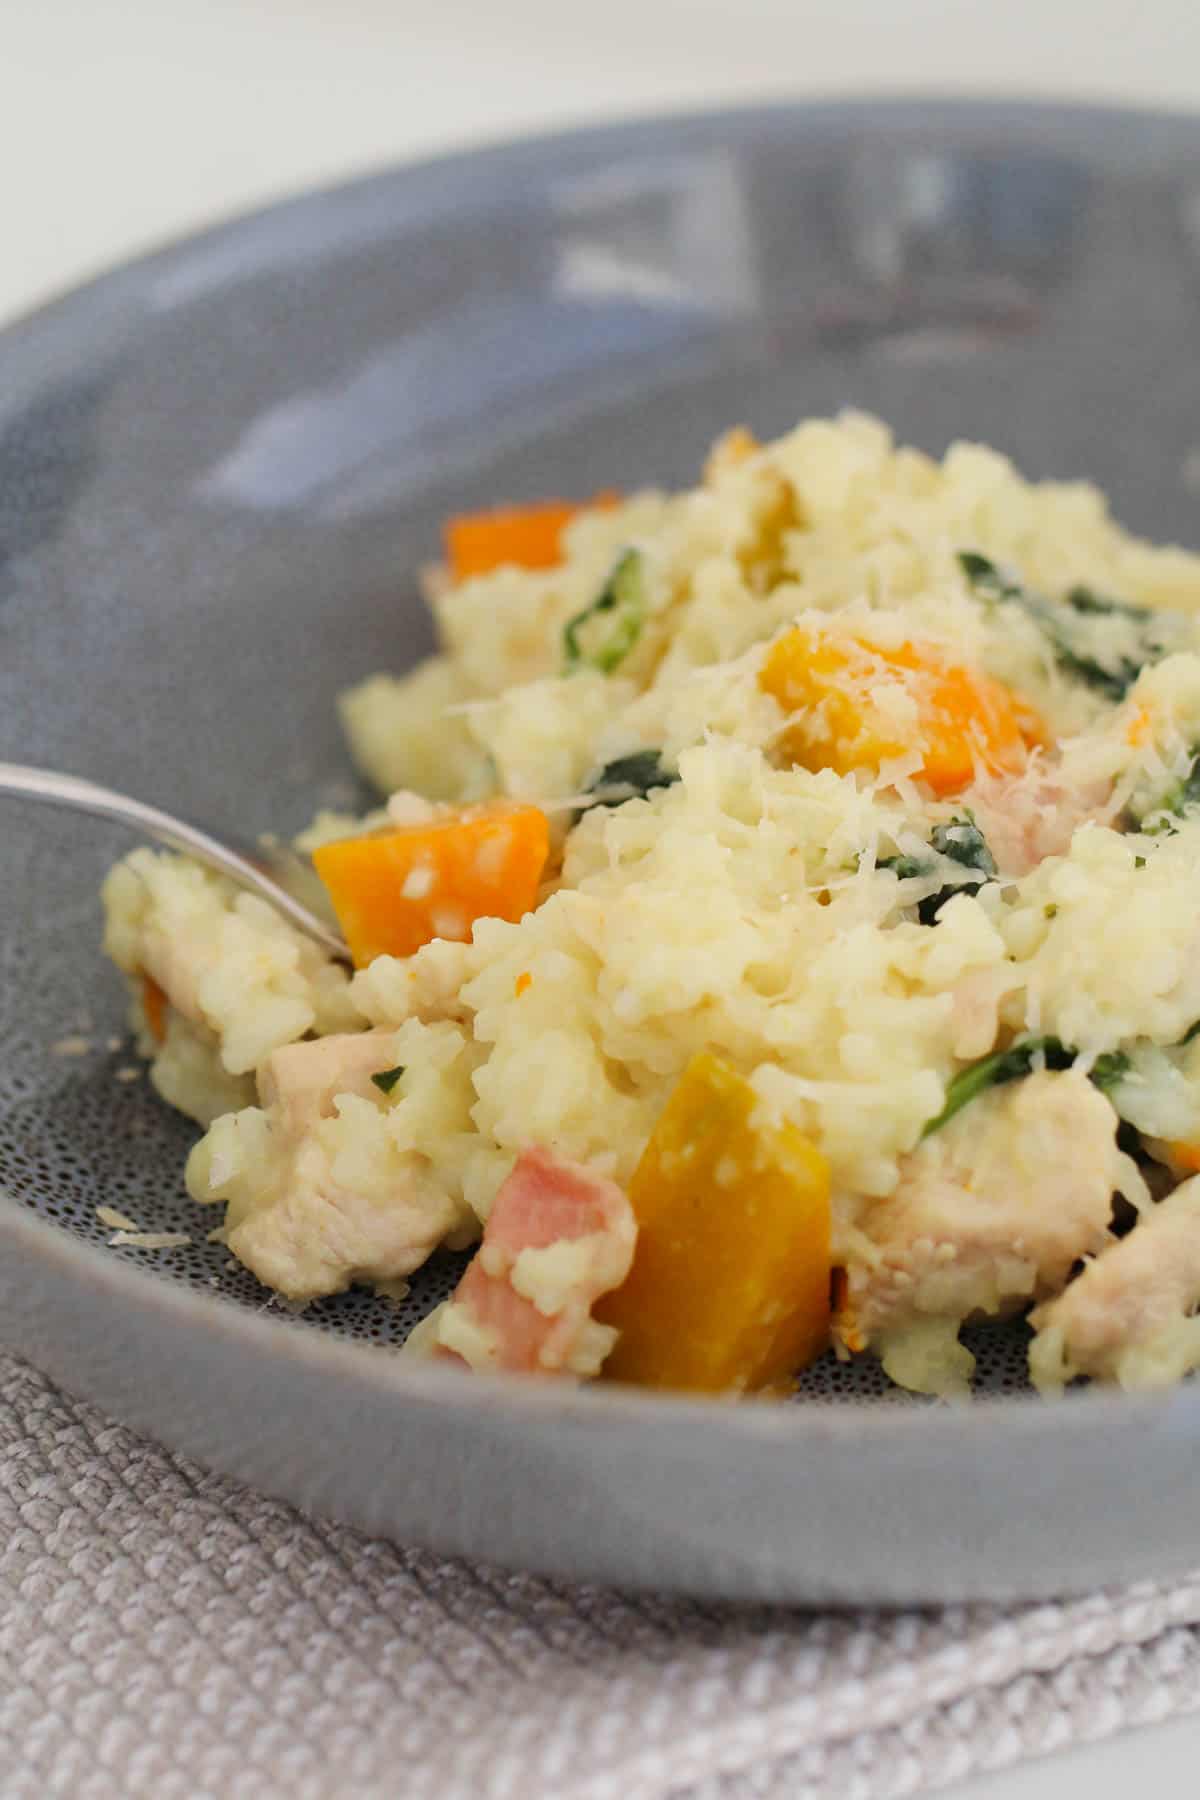 A blue bowl filled with creamy risotto and chicken, pumpkin and spinach.